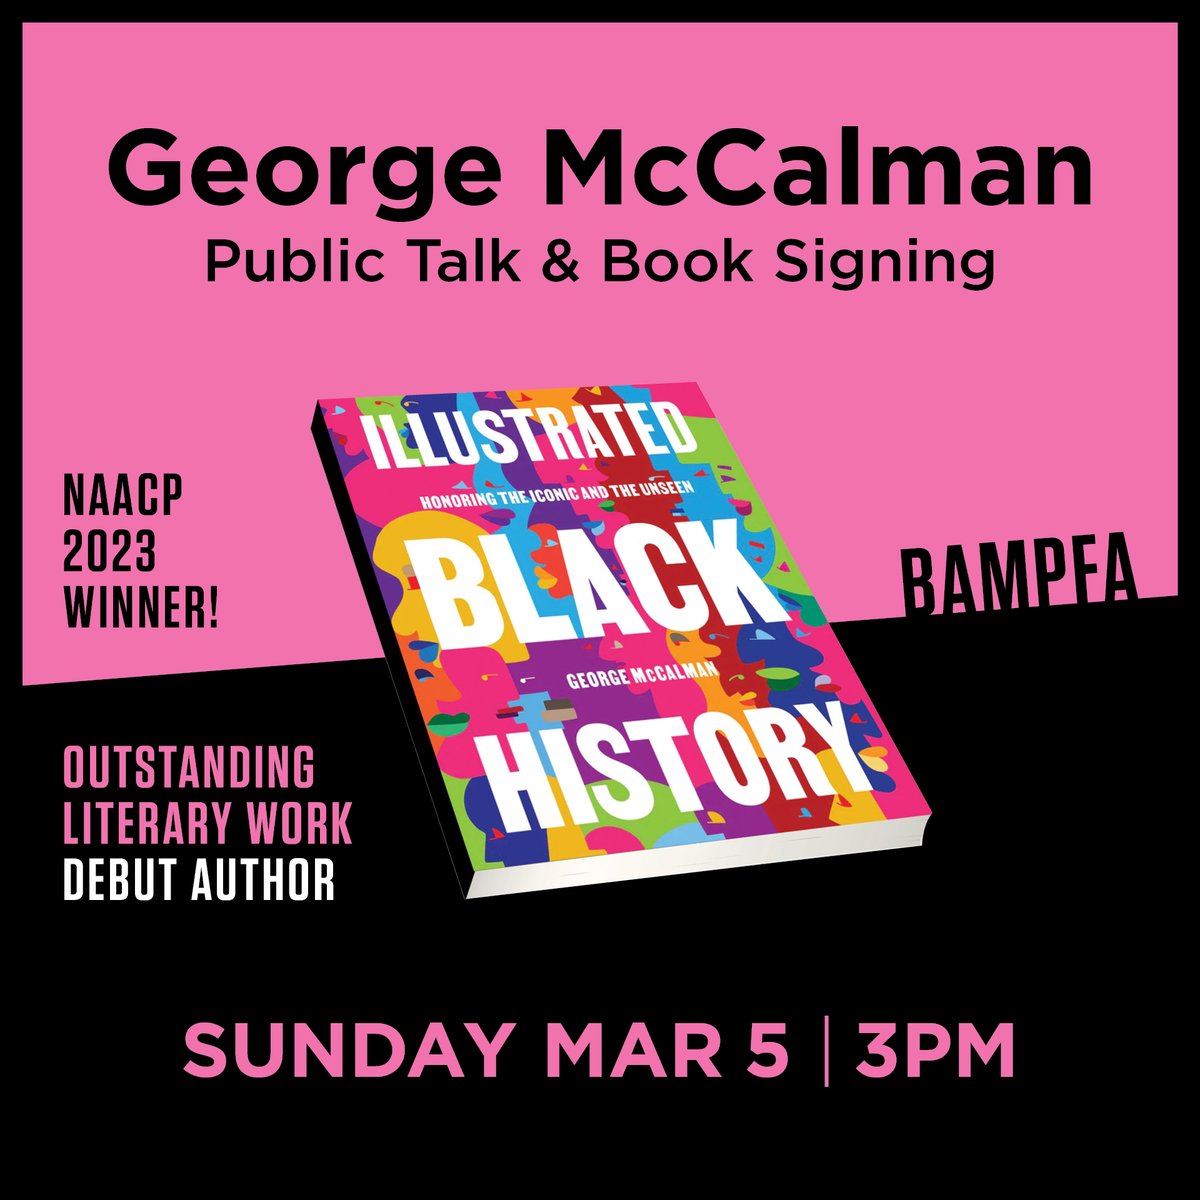 .@mccalmanco, author and artist of Illustrated Black History, will be at BAMPFA tomorrow @ 3 PM for a presentation & book signing. His award-winning book is an artistic celebration and an essential record of Black pioneers across American history. bampfa.org/event/george-m…